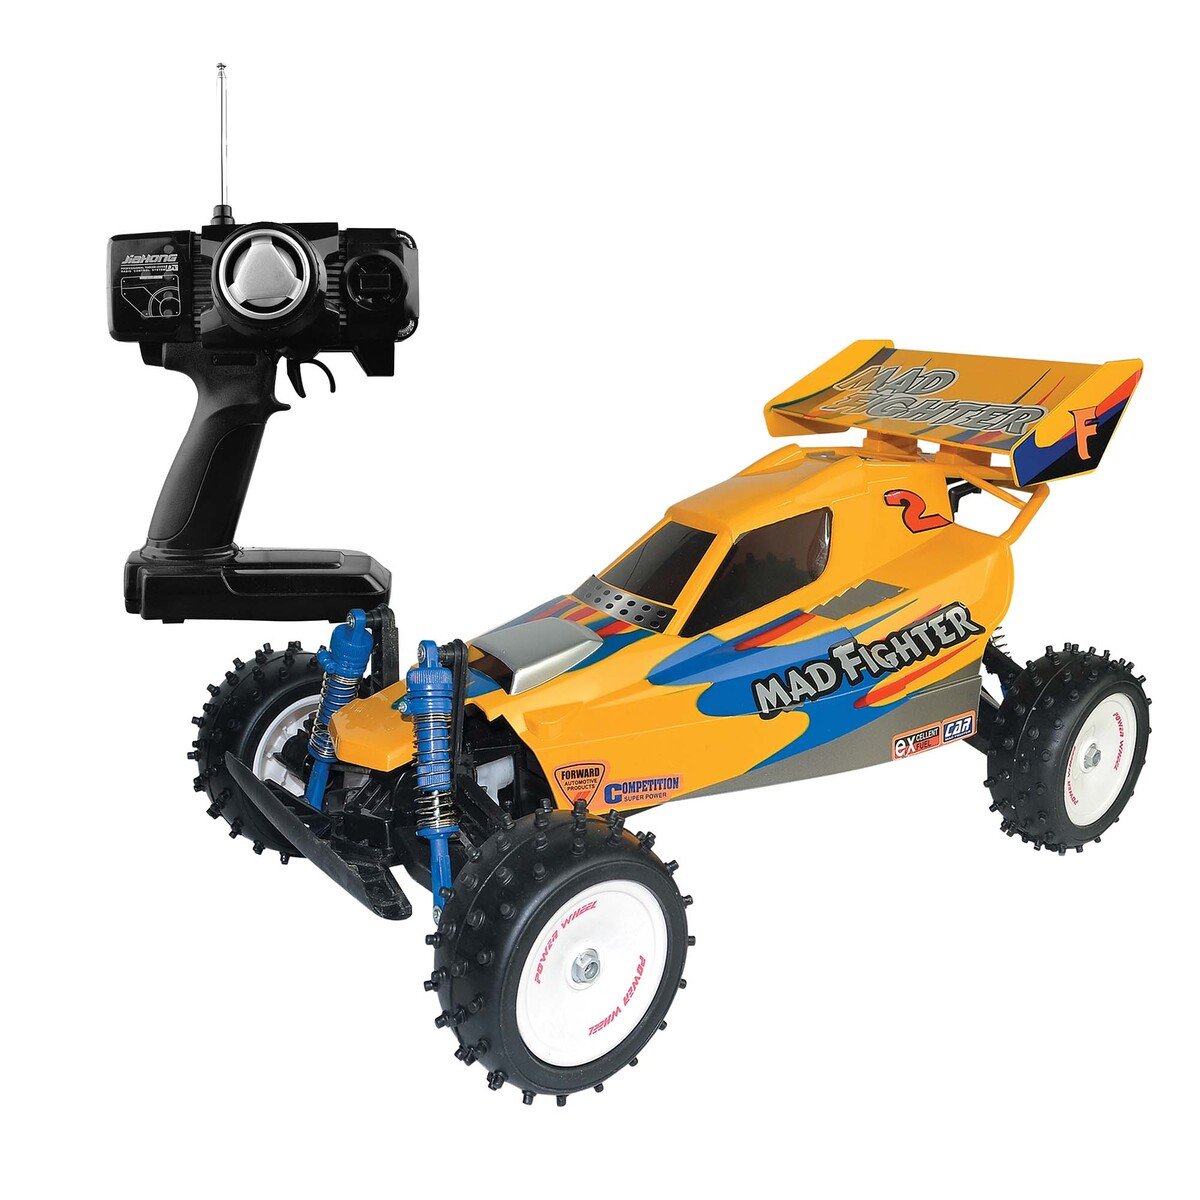 Remote Controlled Desert Buggy Car 1:8 DC5224